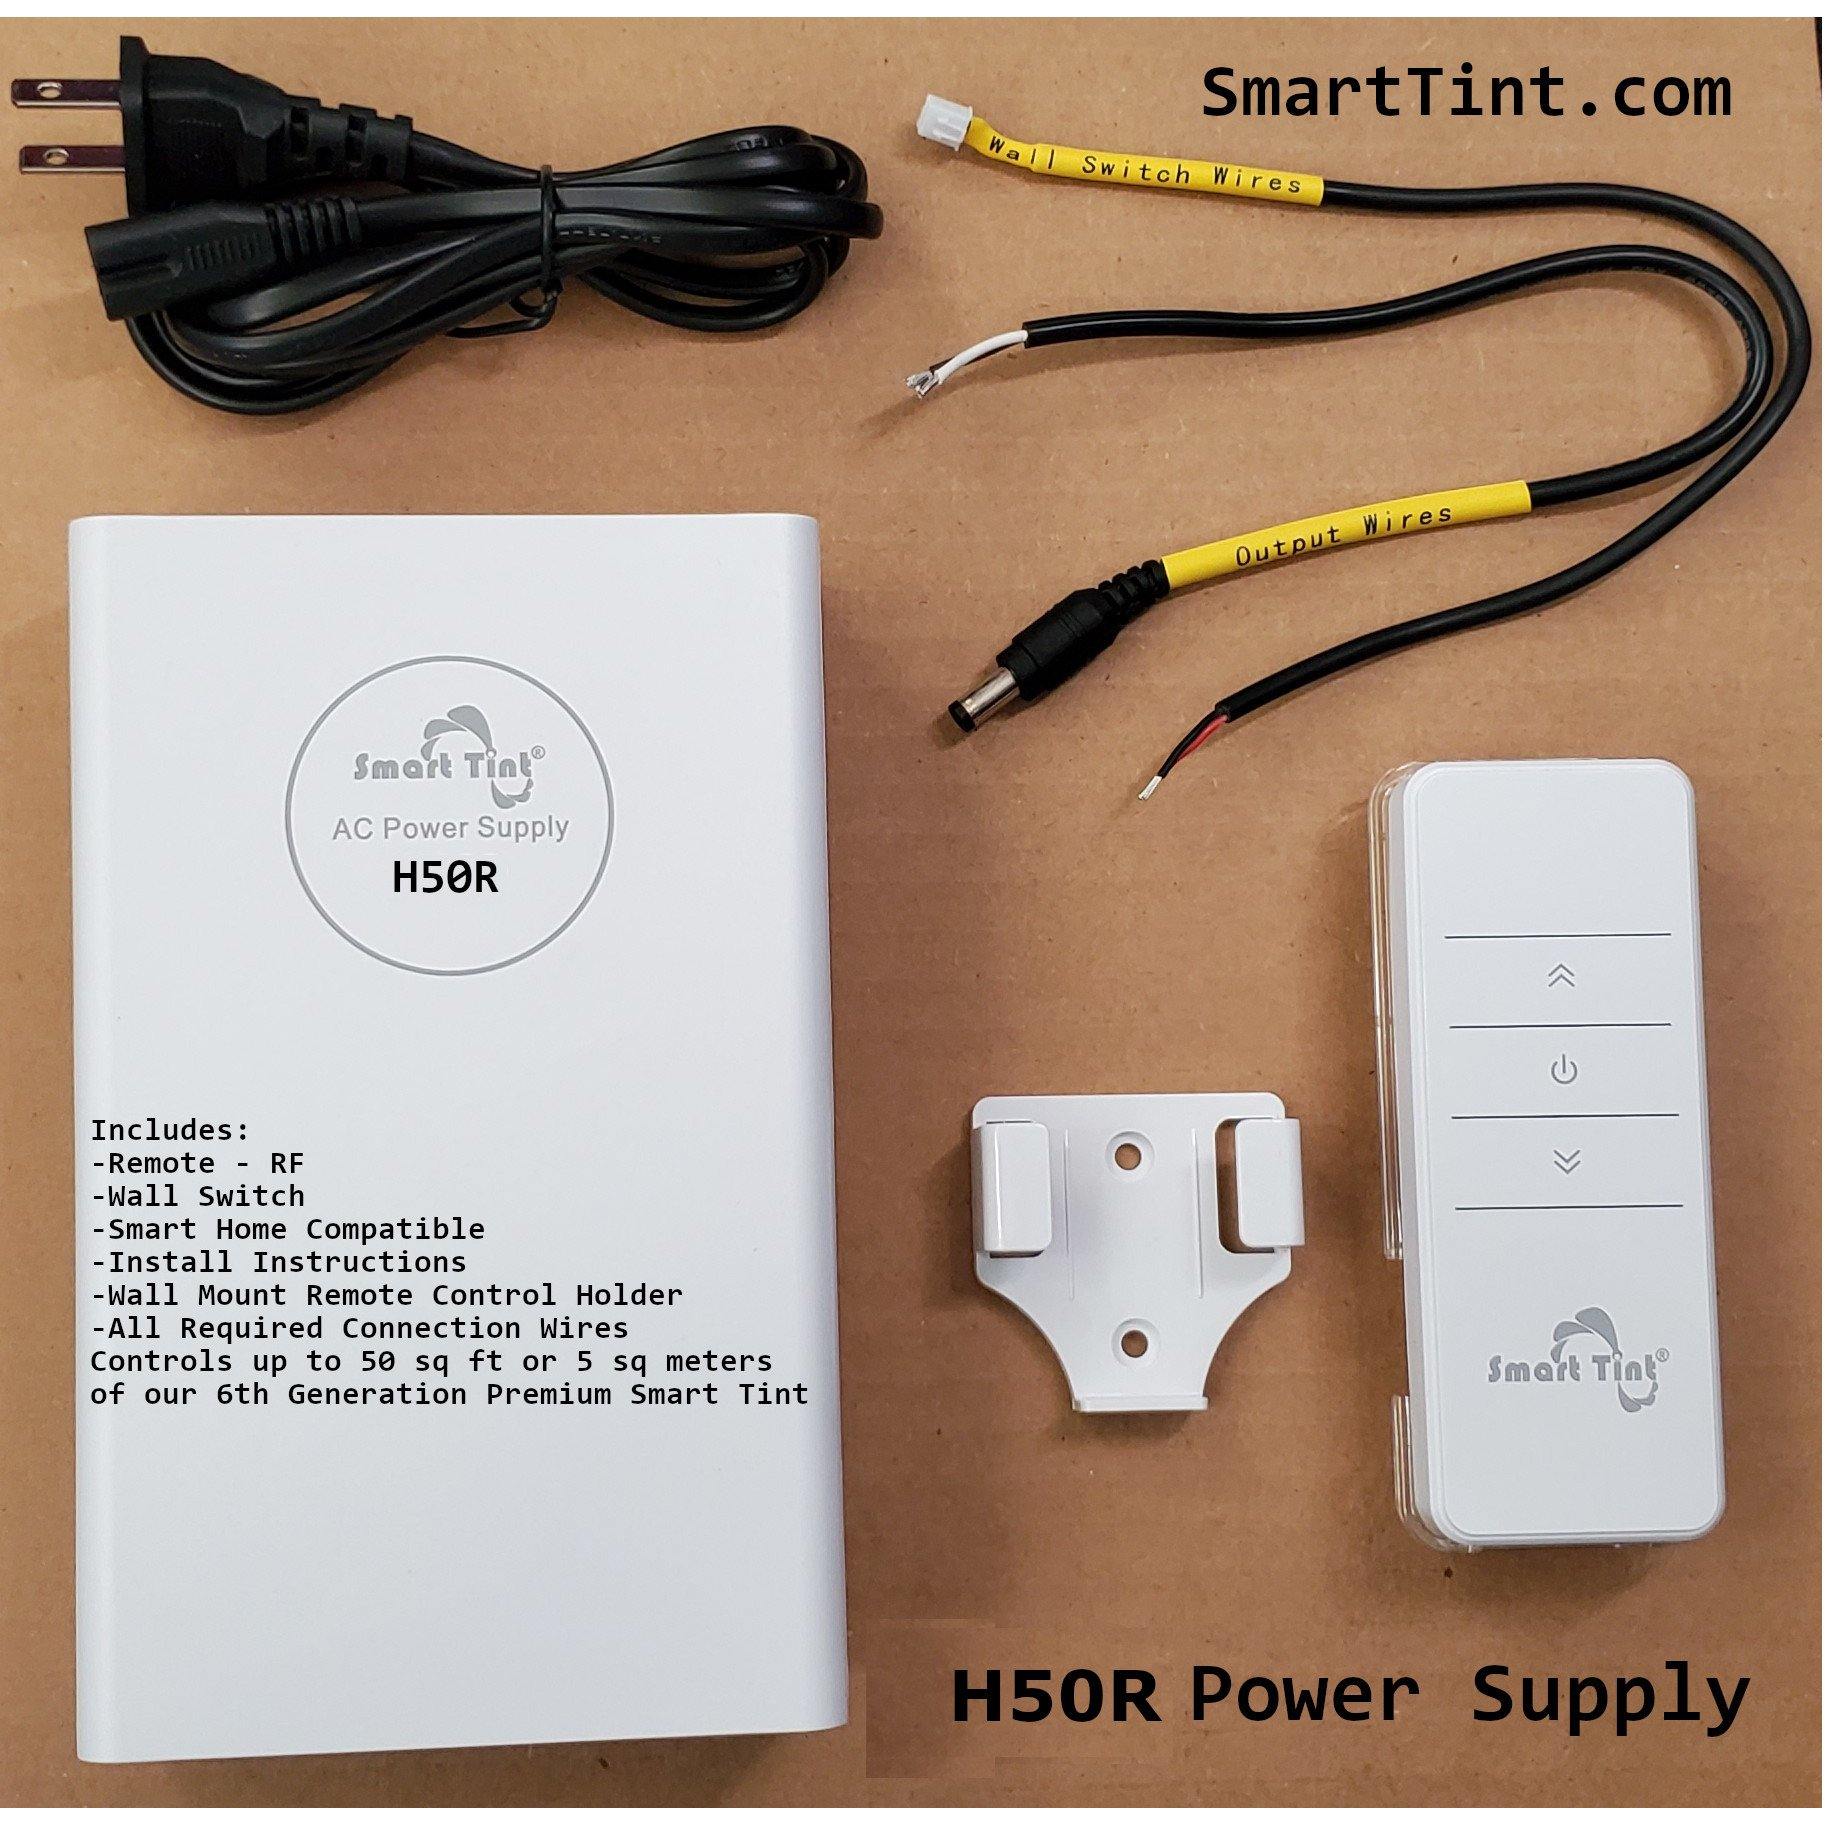 Smart Tint Power Supply H-50R w/ Remote Control/Wall Switch - Smart Film